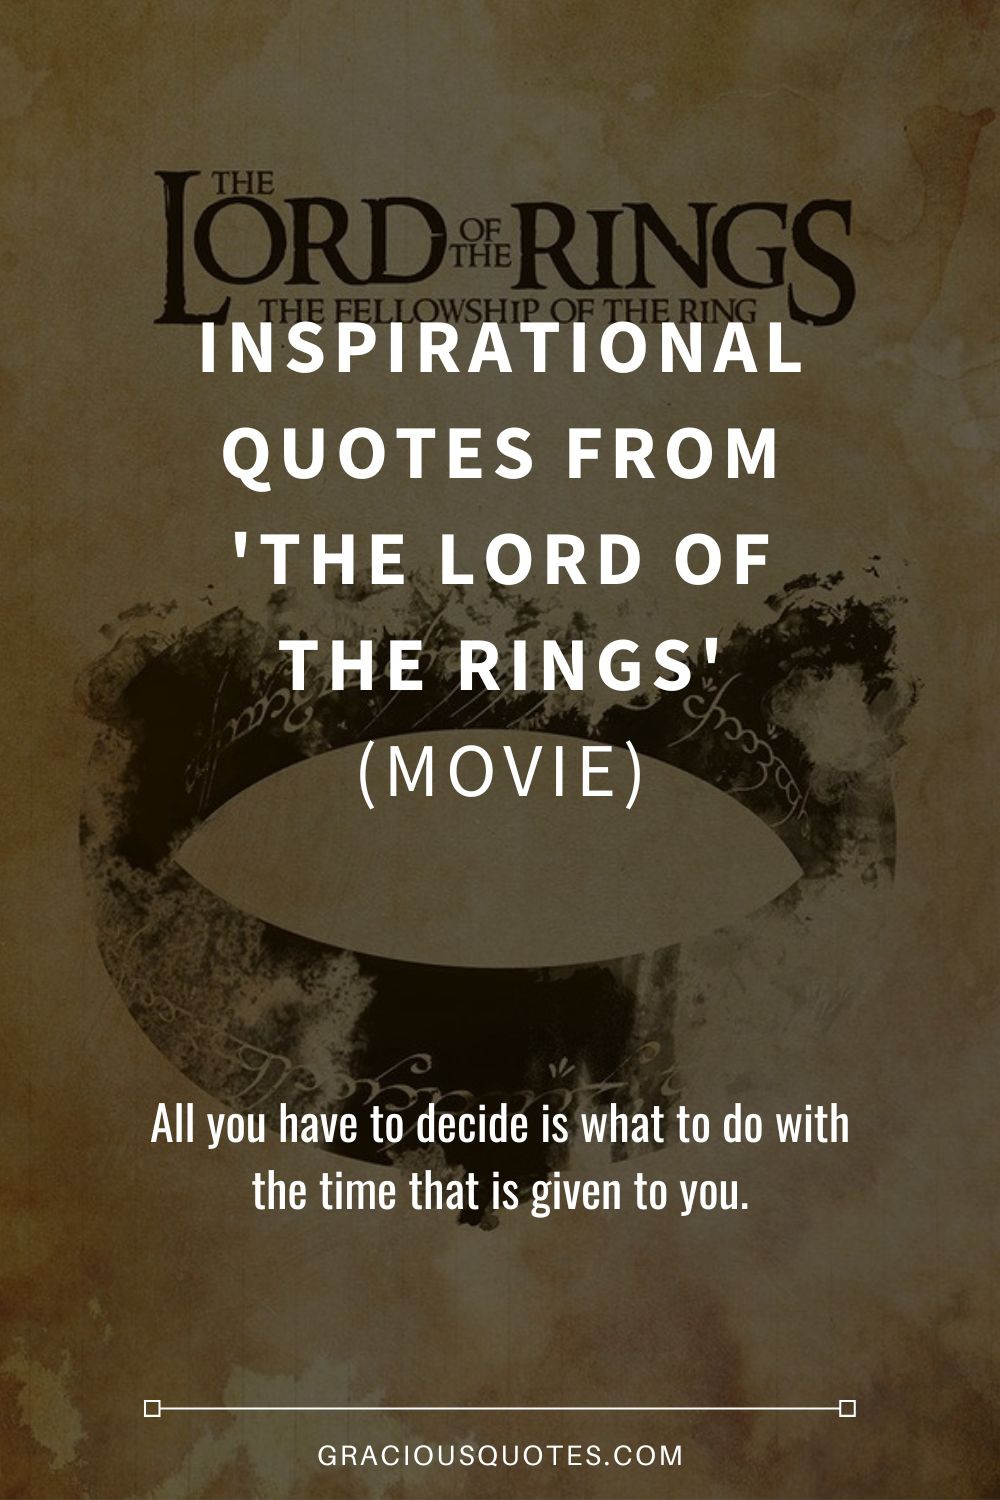 Inspirational Quotes from 'The Lord of the Rings' (MOVIE) - Gracious Quotes